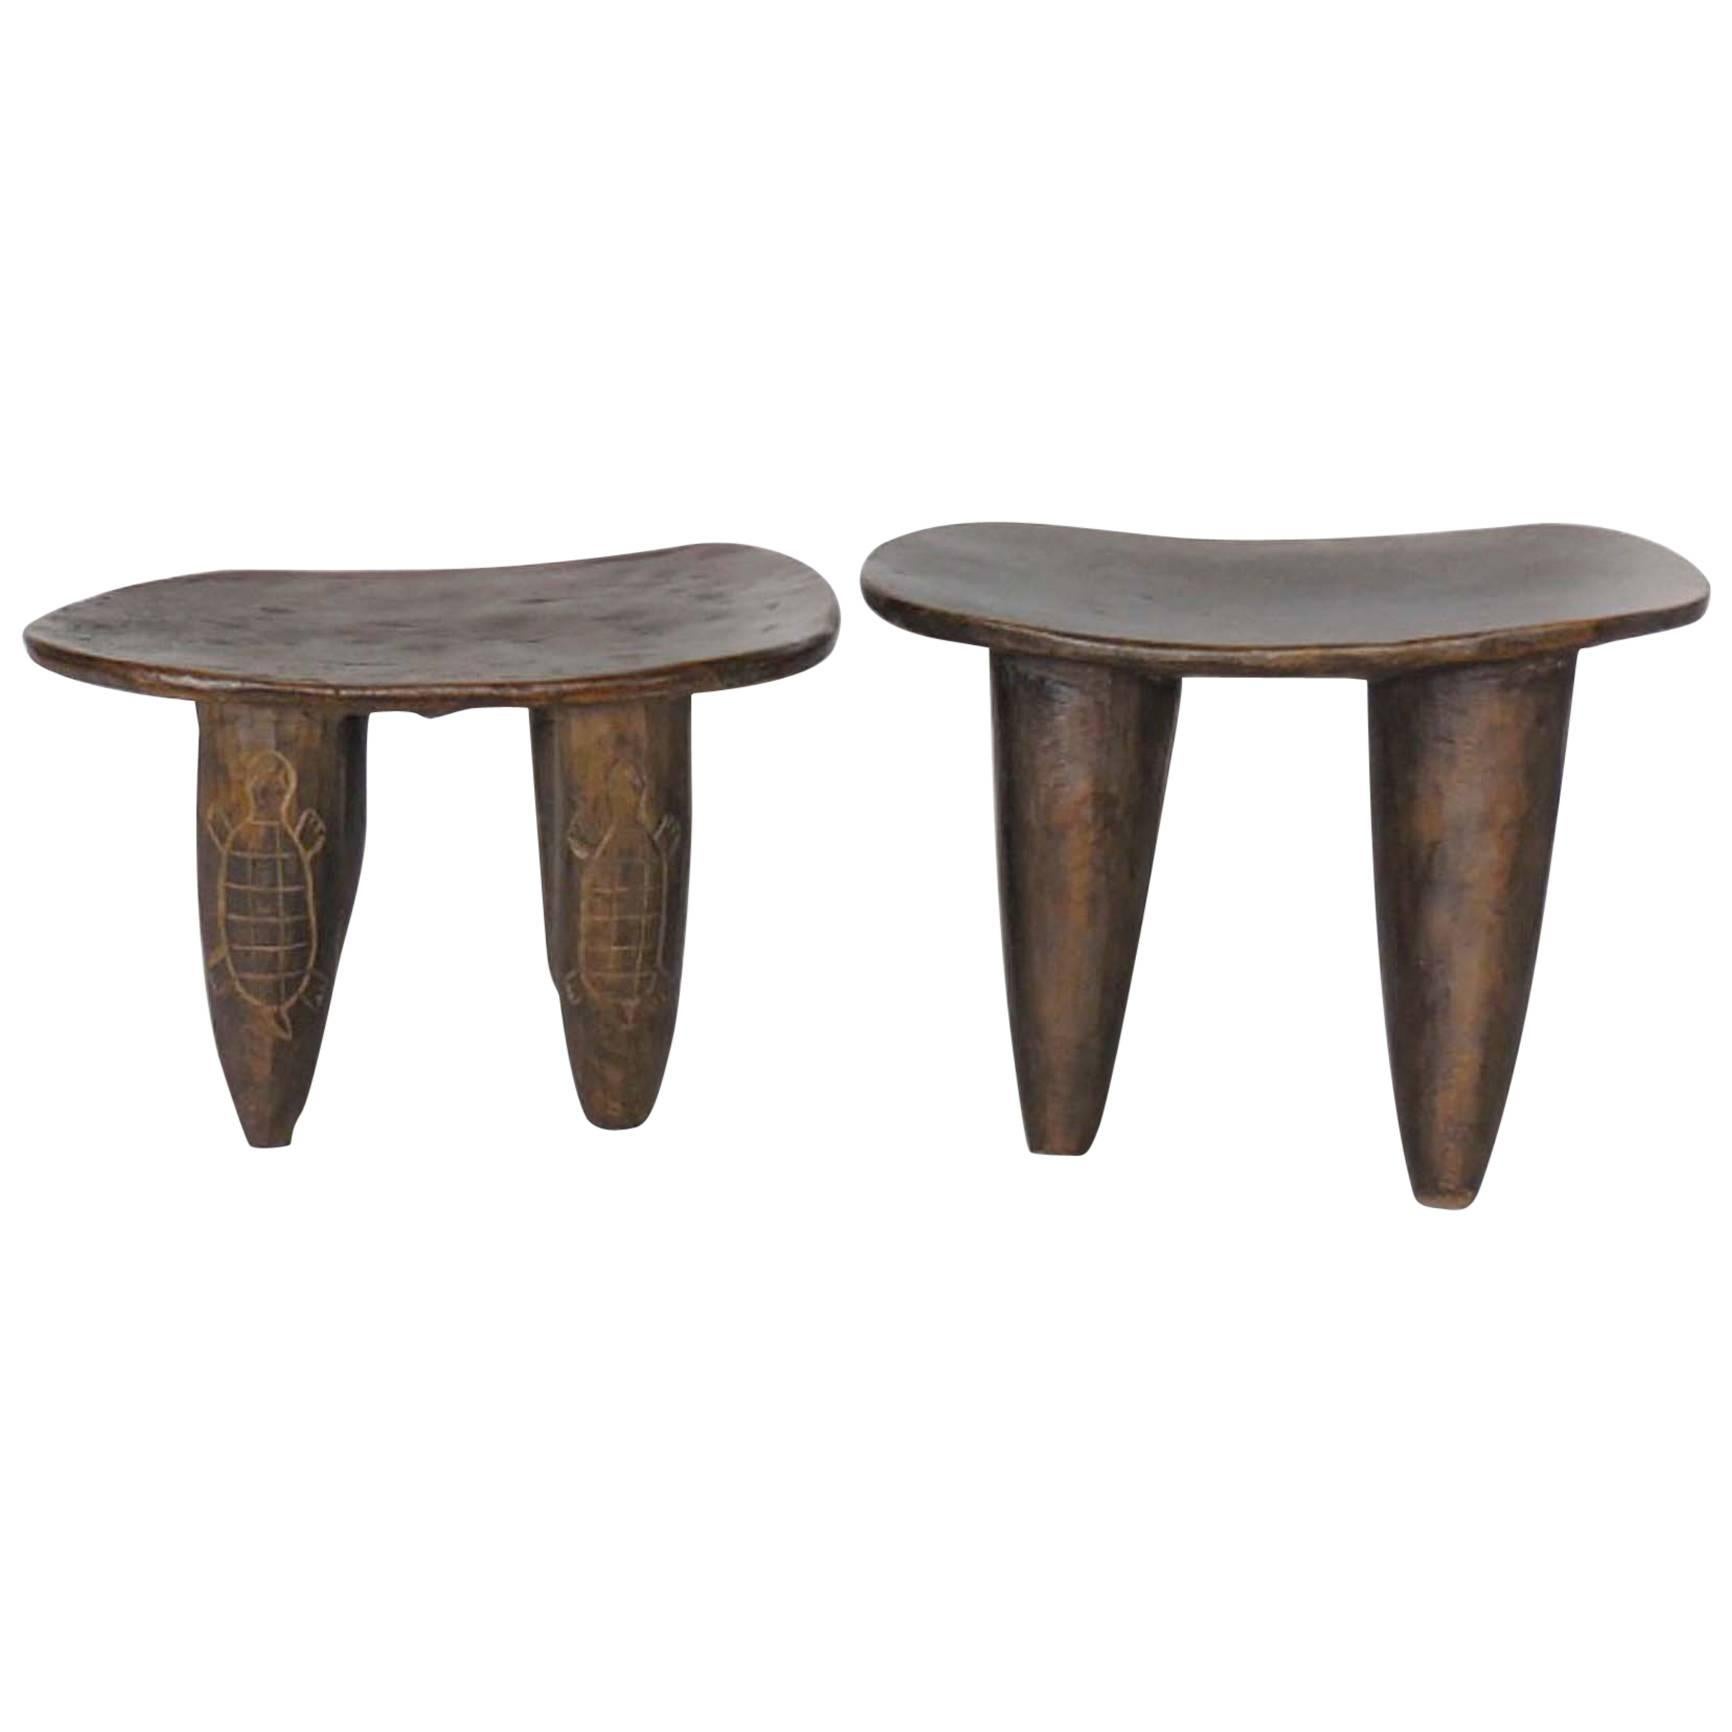 Tribal Hand-Carved Stool from Mali - LEFT ONE AVAILABLE